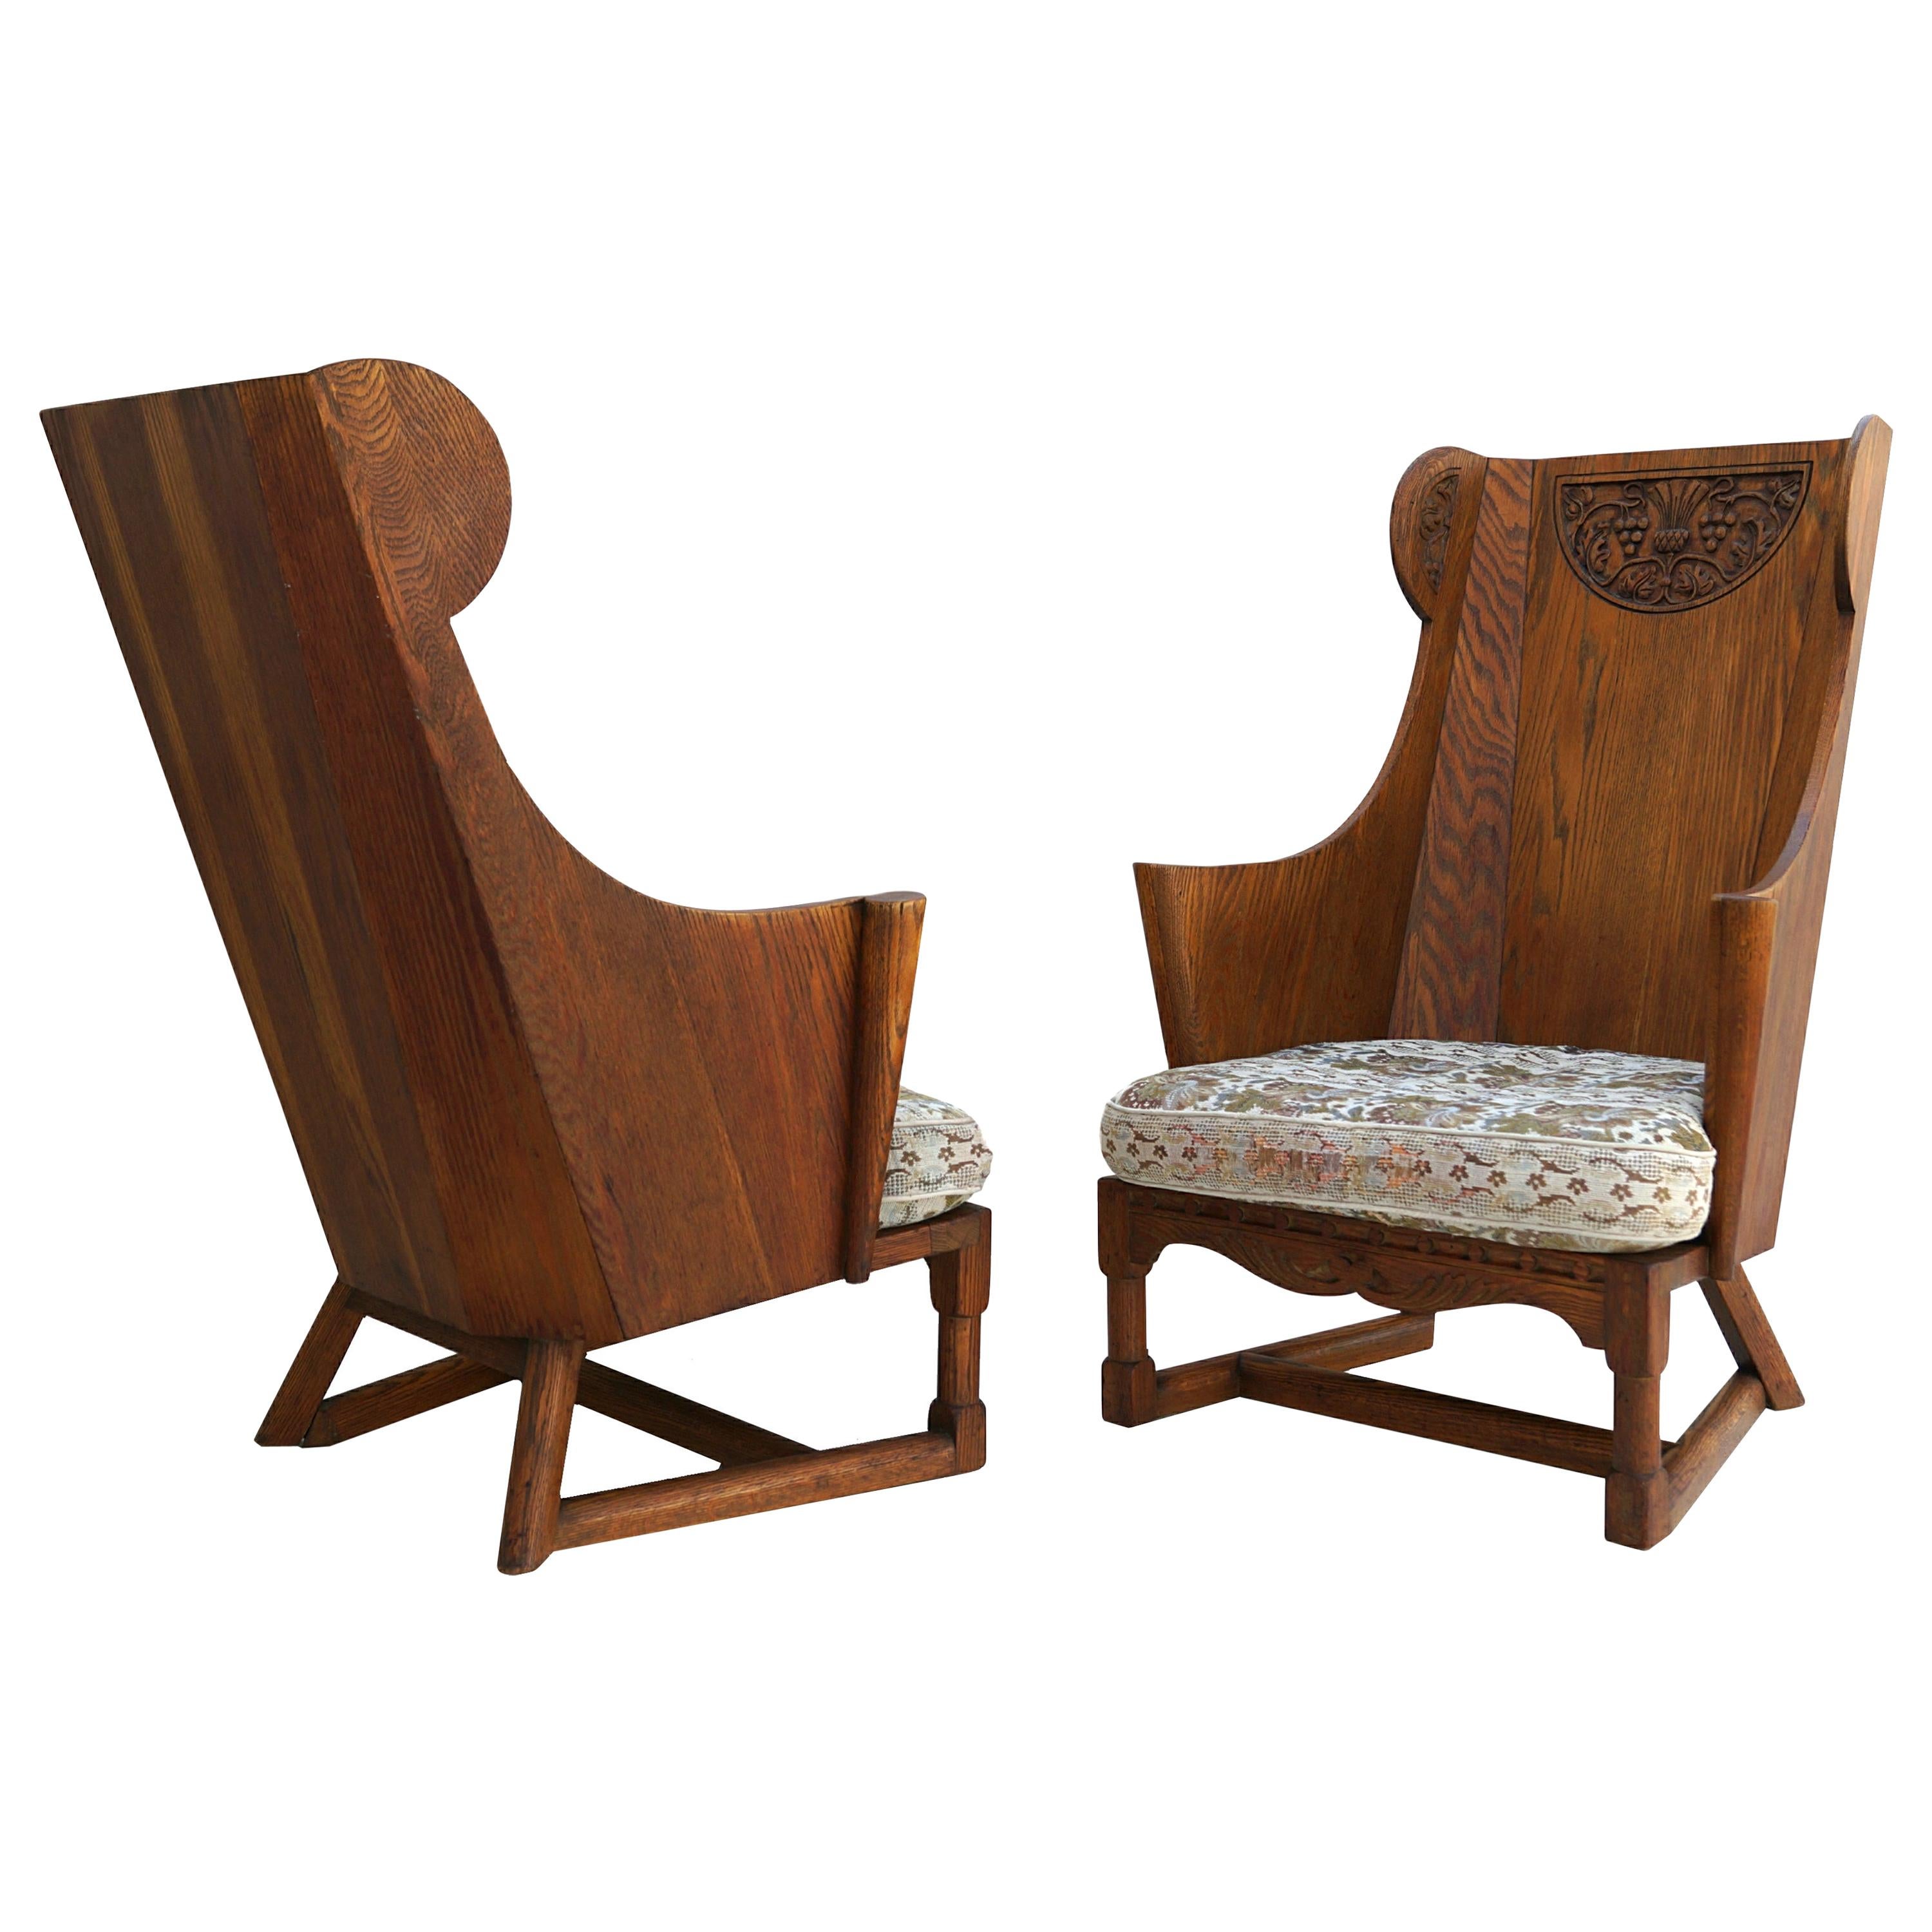 Antique Pair Of Carved Oak Lounge, Antique Wooden Wingback Chair